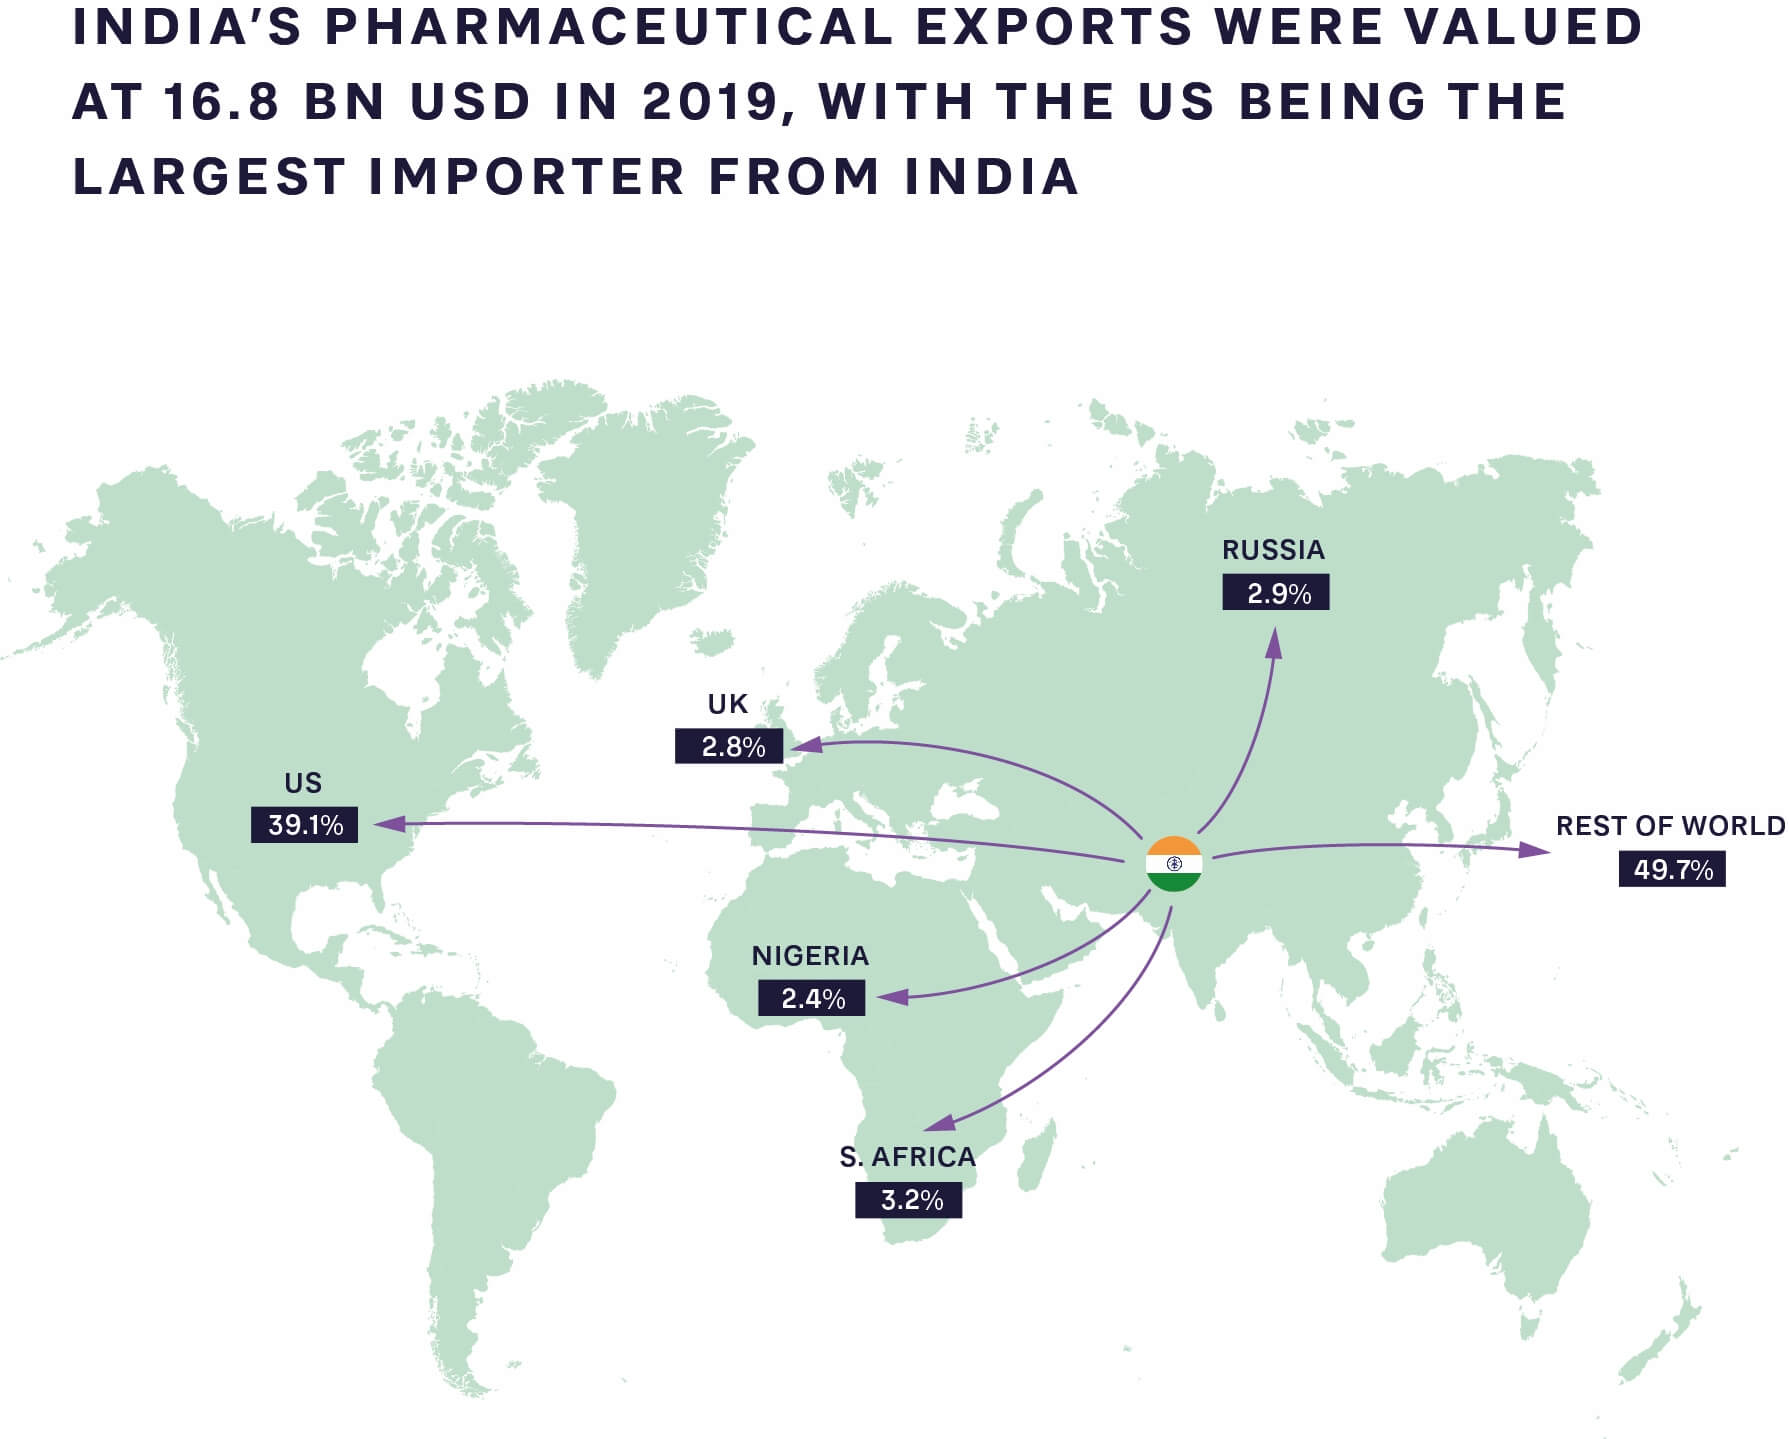 PHARMACEUTICAL EXPORTS FROM INDIA TO THE REST OF THE WORLD 2019 SOURCE: GLOBAL DATA, ARTHUR D. LITTLE ANALYSIS